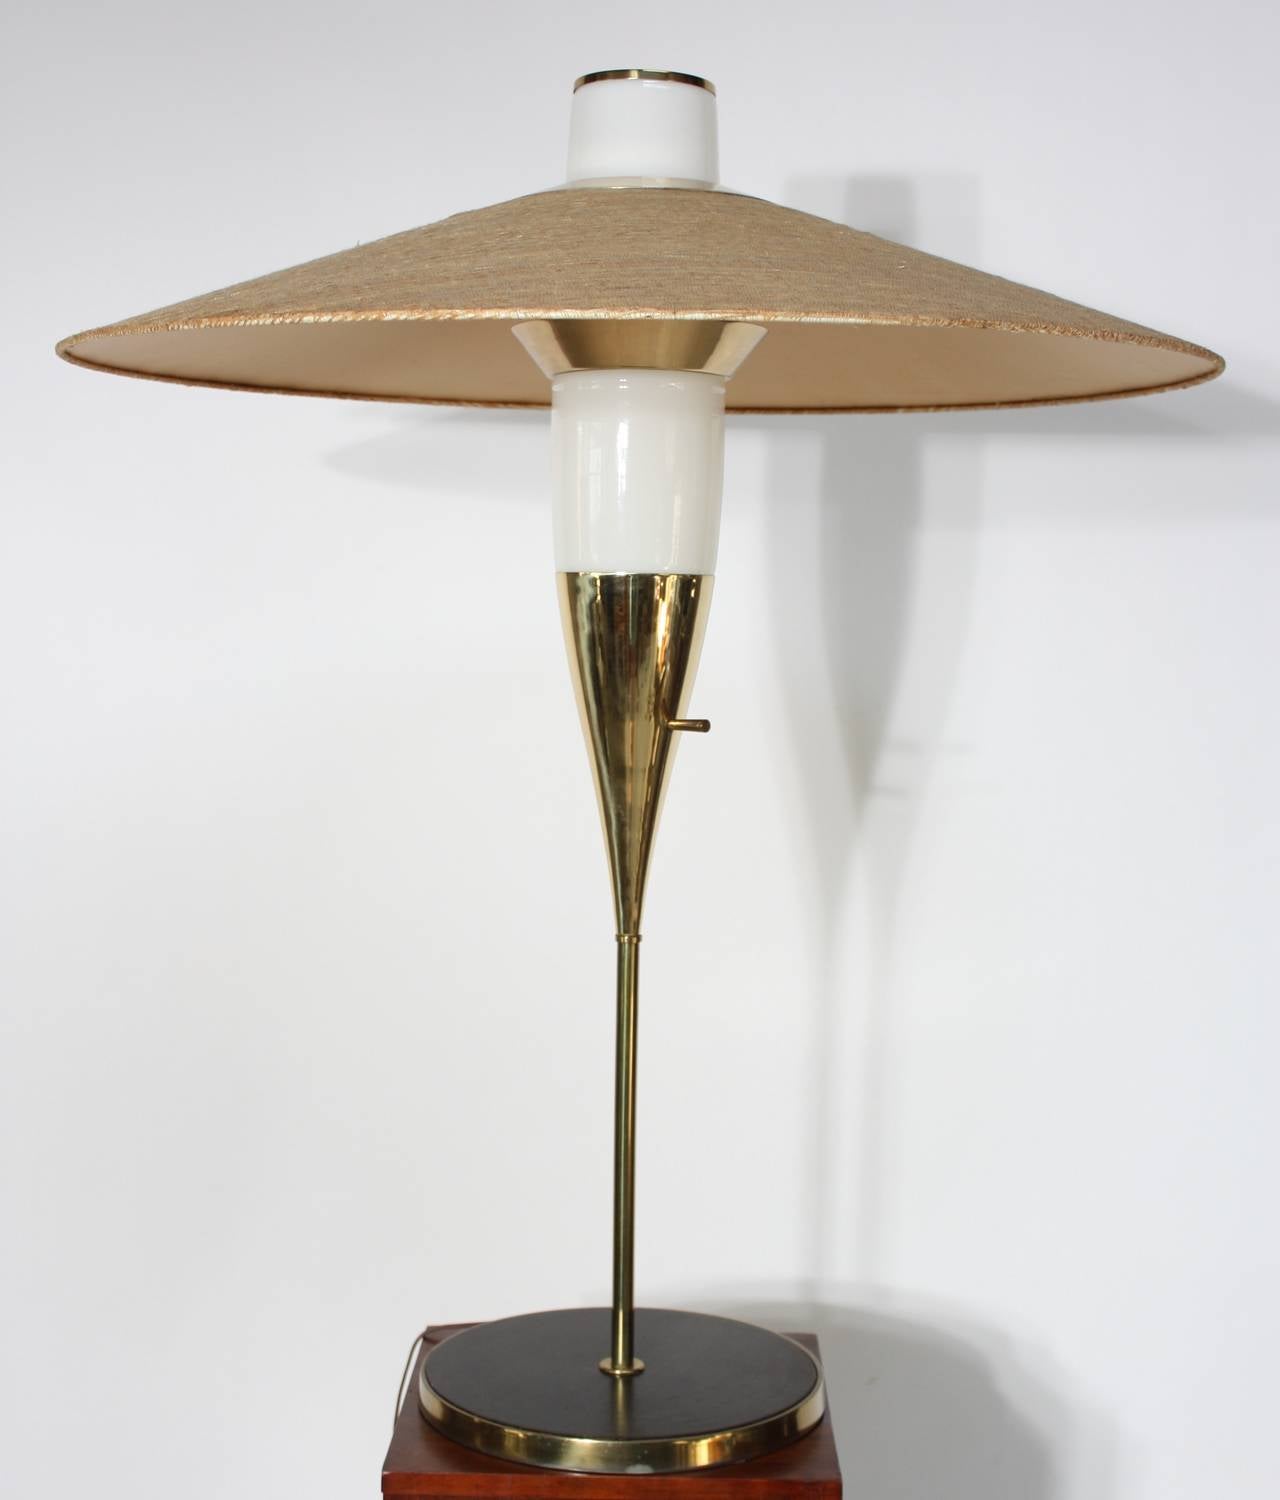 This spectacular table lamp is comprised of a rosewood veneer / brass-lined base, solid brass stem, cased glass shade, and oversized grass-cloth shade. This lamp has design elements of both Laurel and Gerald Thurston, but it is unsigned /